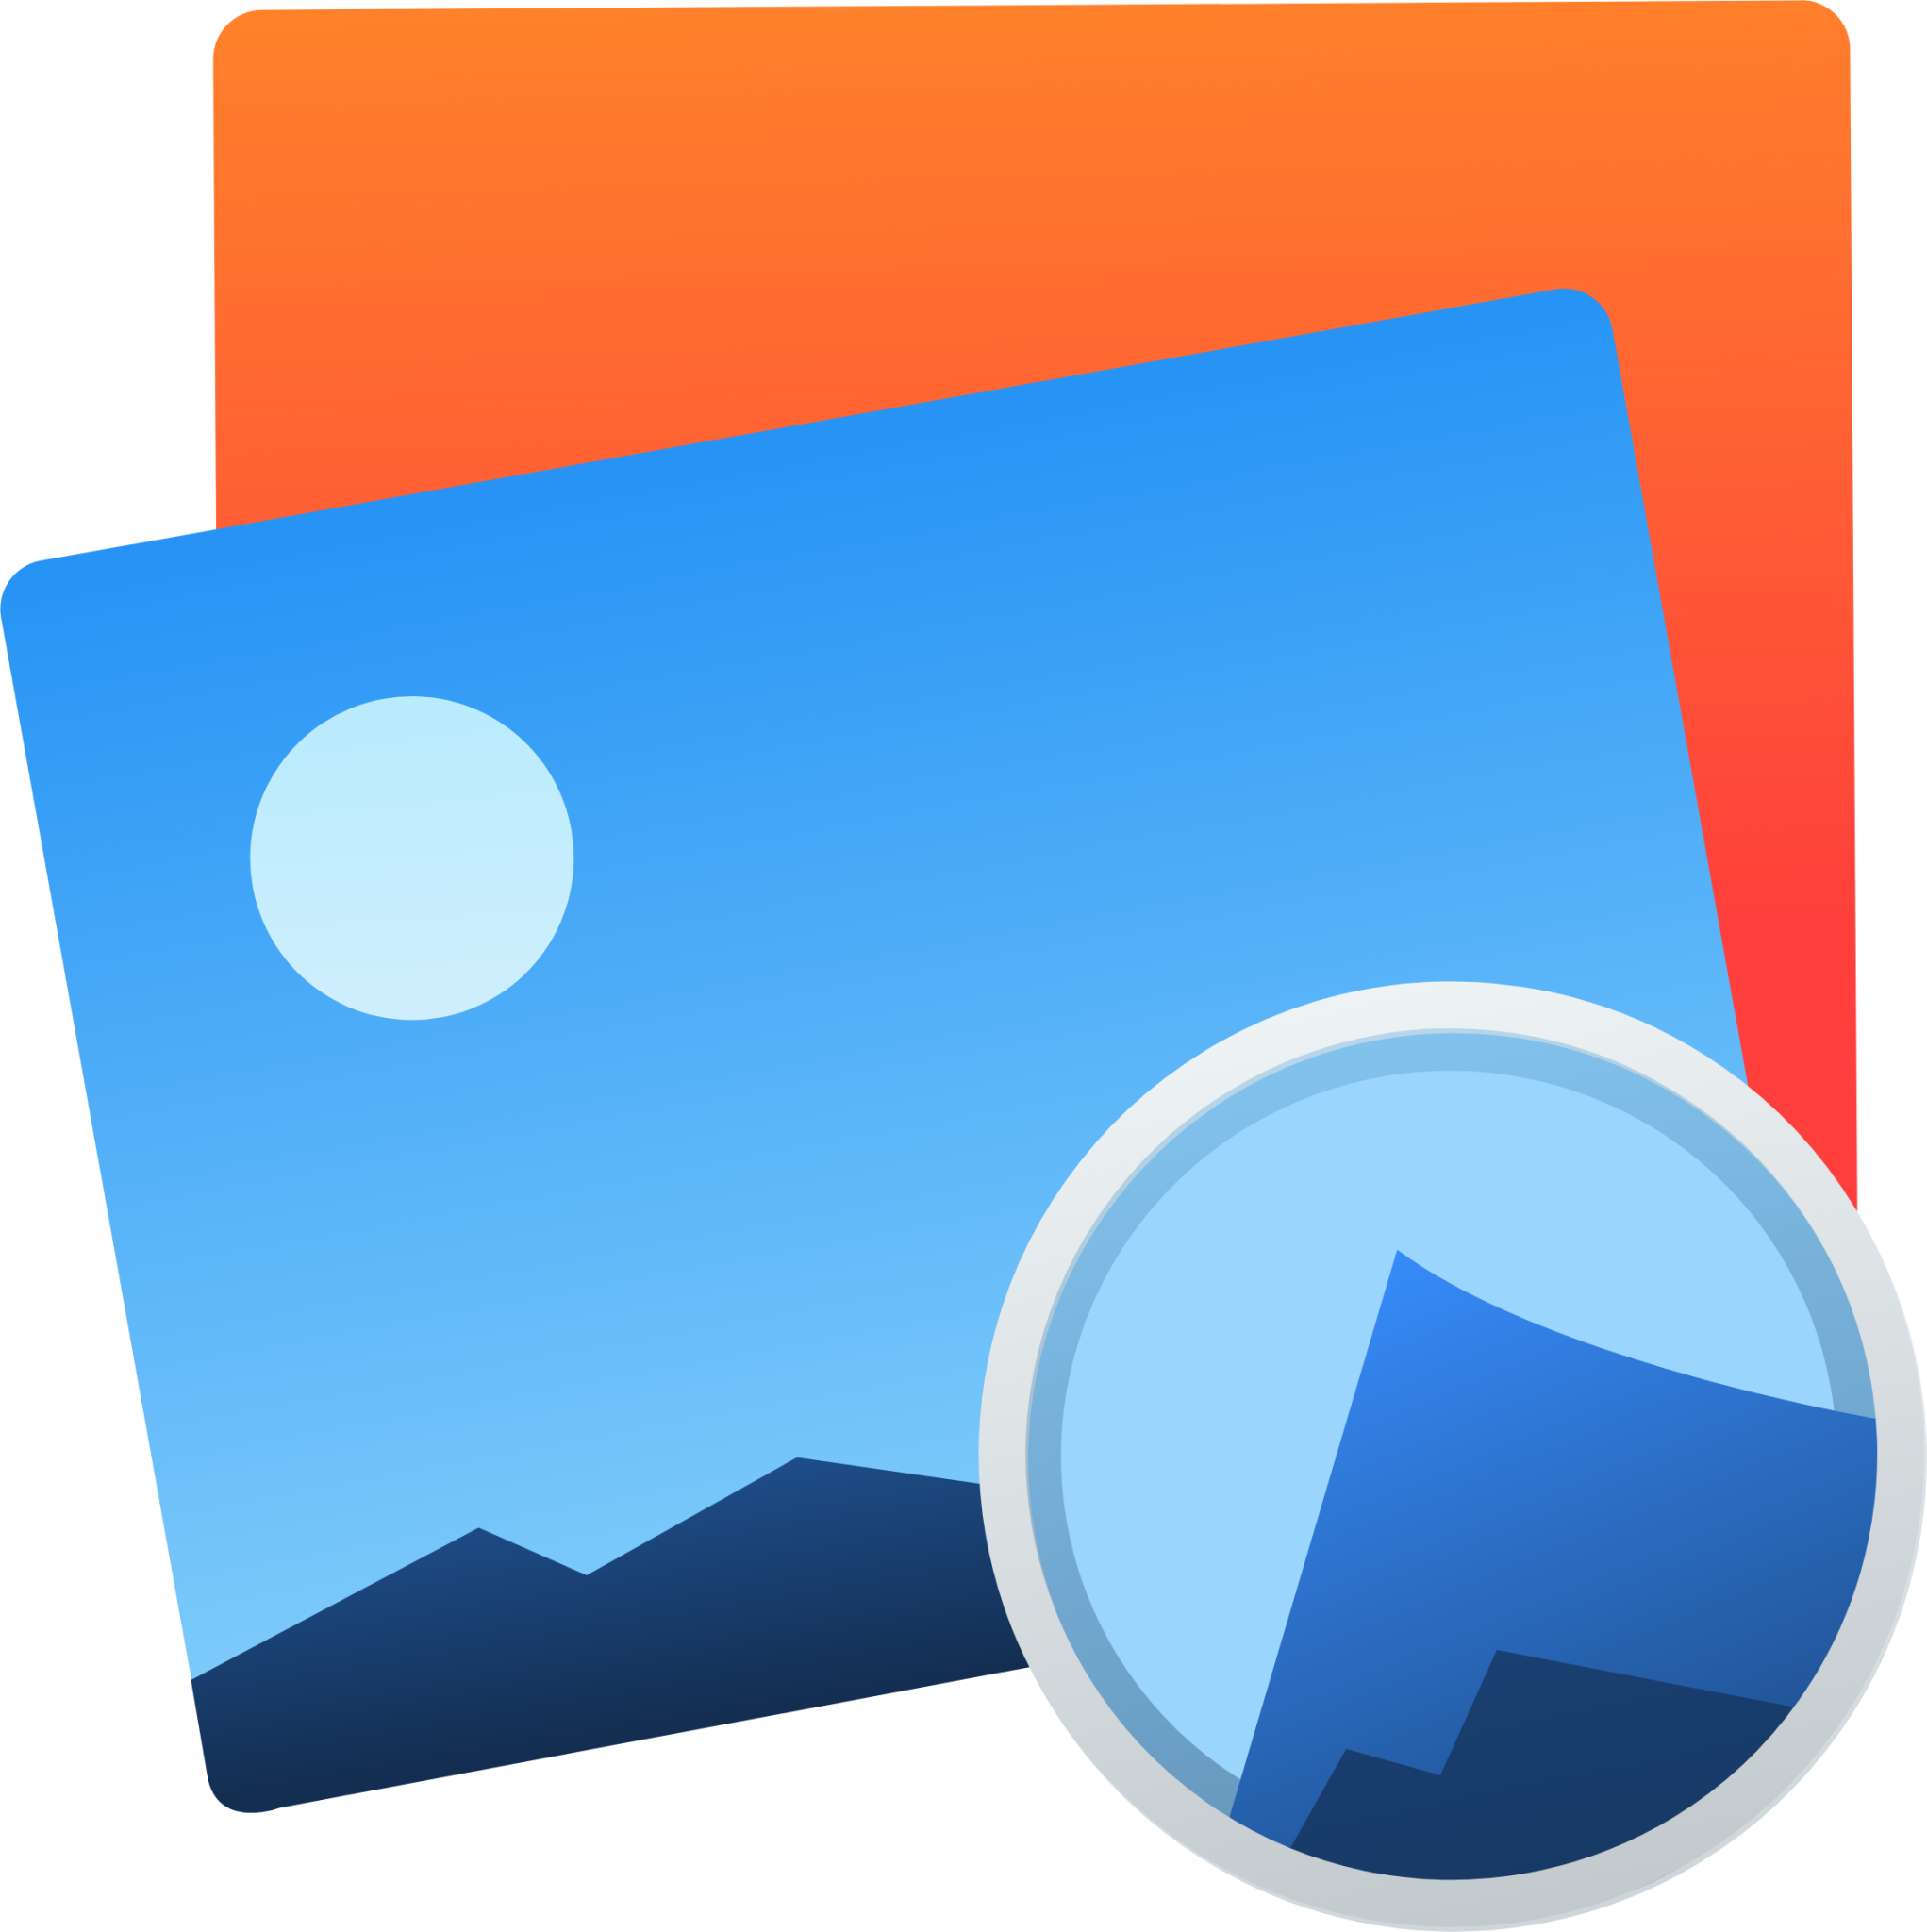 accessories image viewer icon